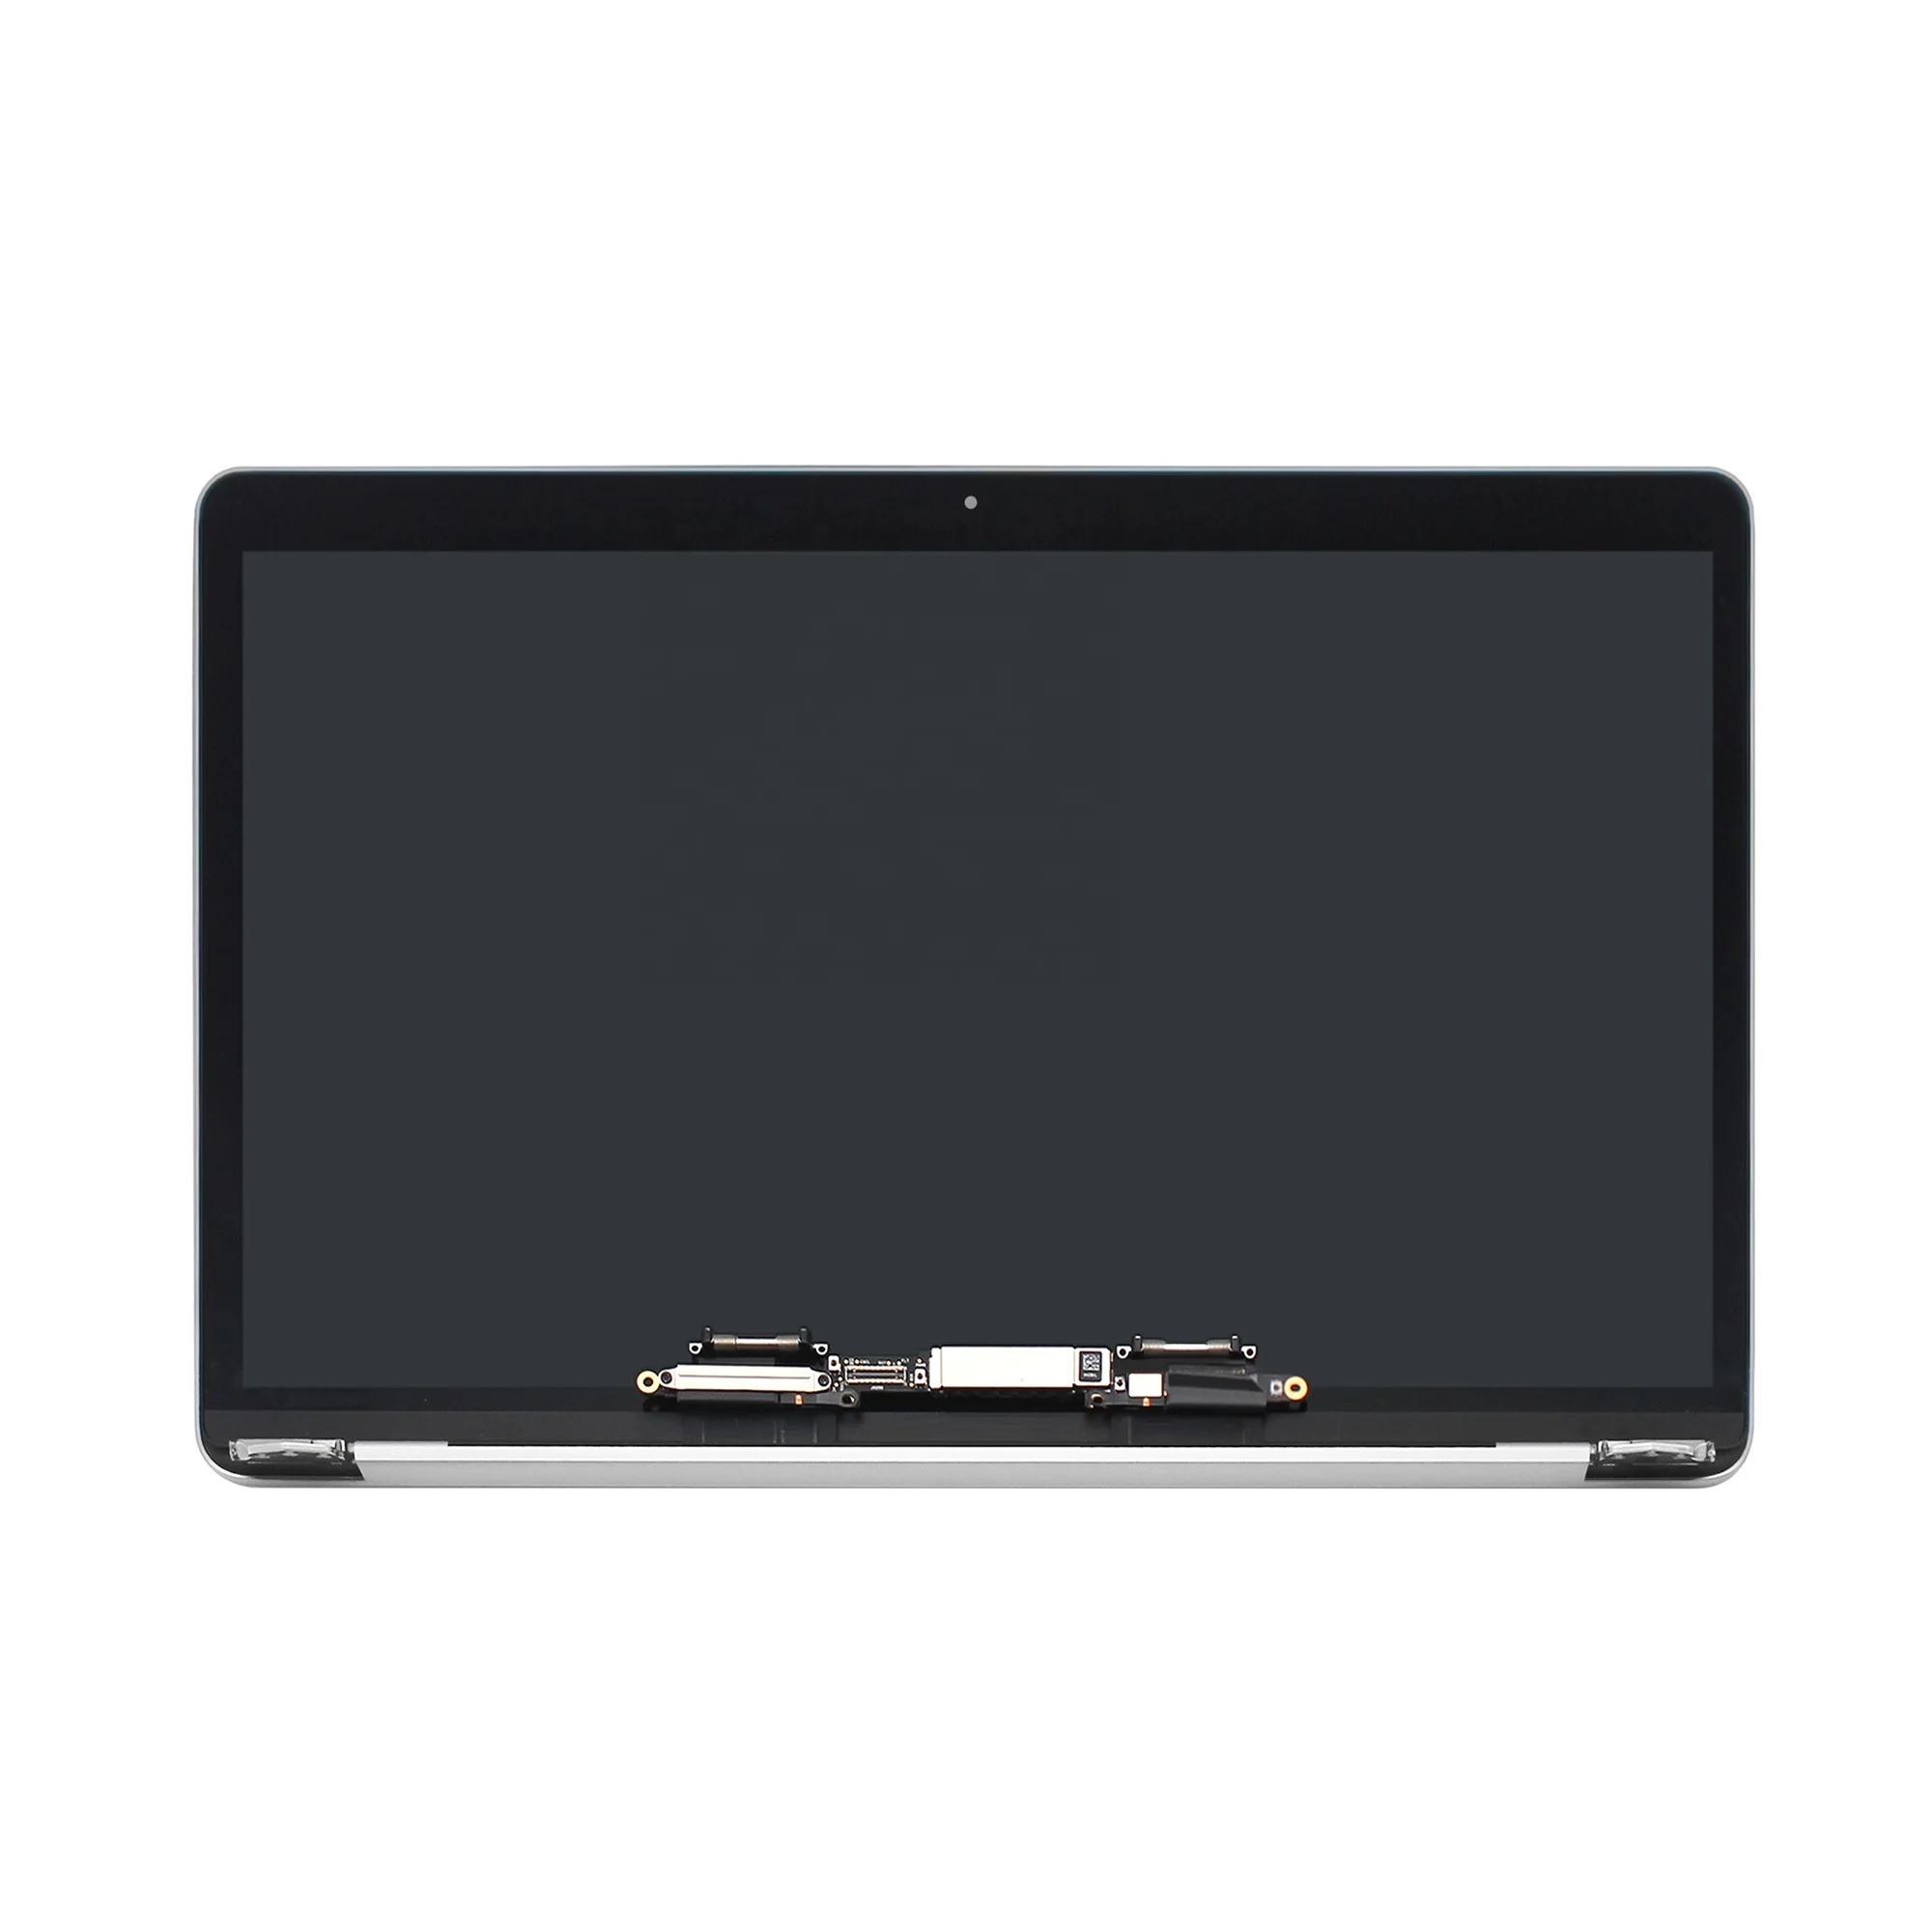 

Space Grey Silver Display Assembly LCD For Macbook Pro Retina 13 inch 2017 2018 A1706 A1708 LCD Screen EMC 3071 3163 2978 3164